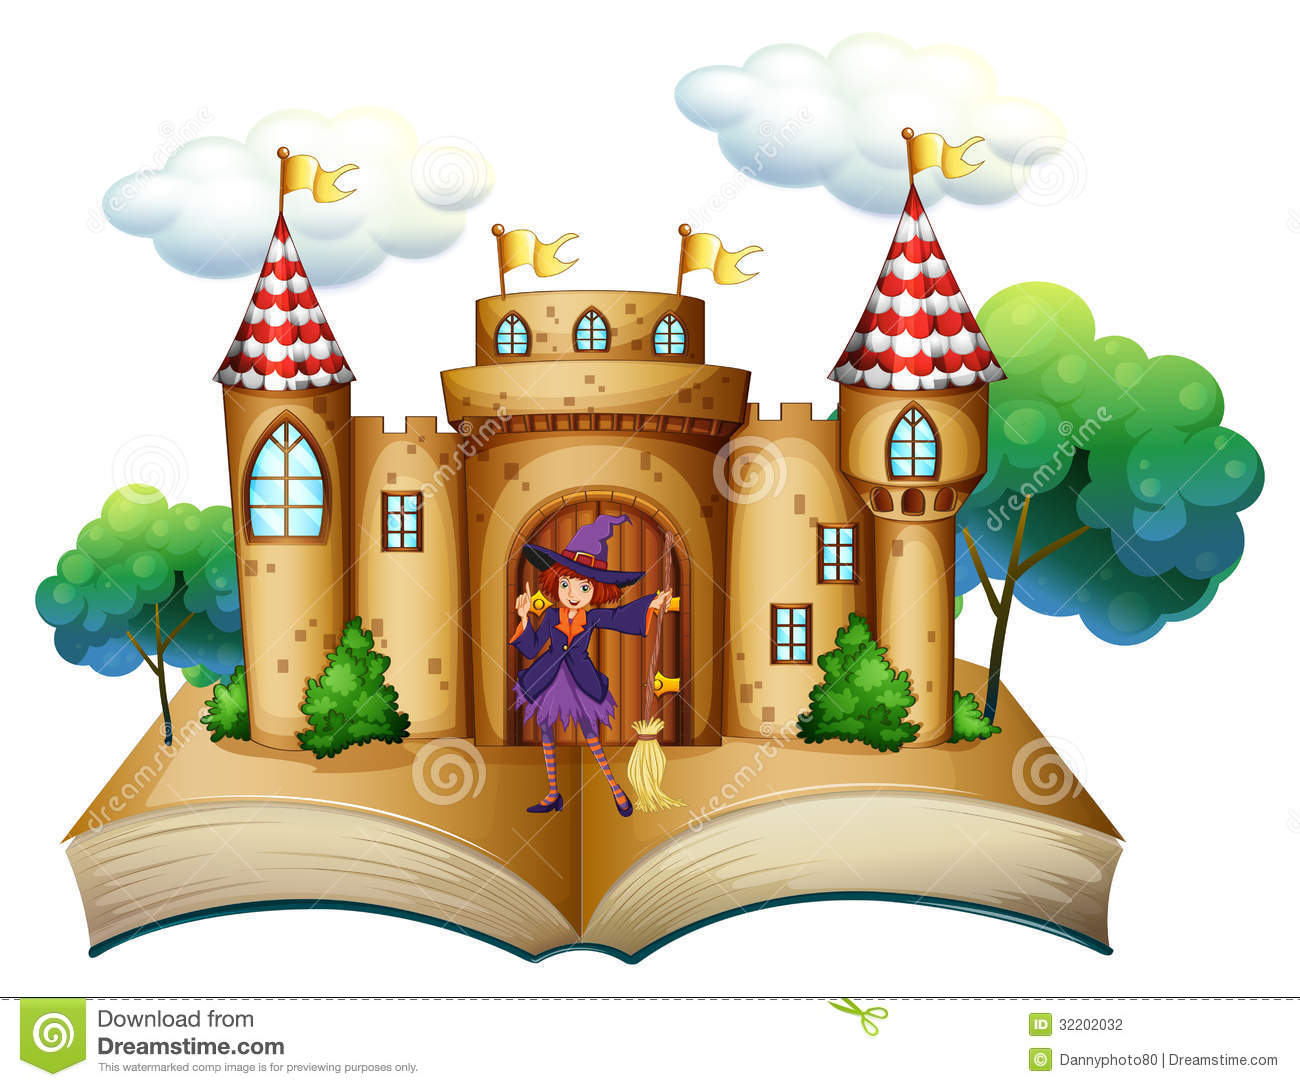 Illustration Of A Storybook With A Castle And A Witch On A White